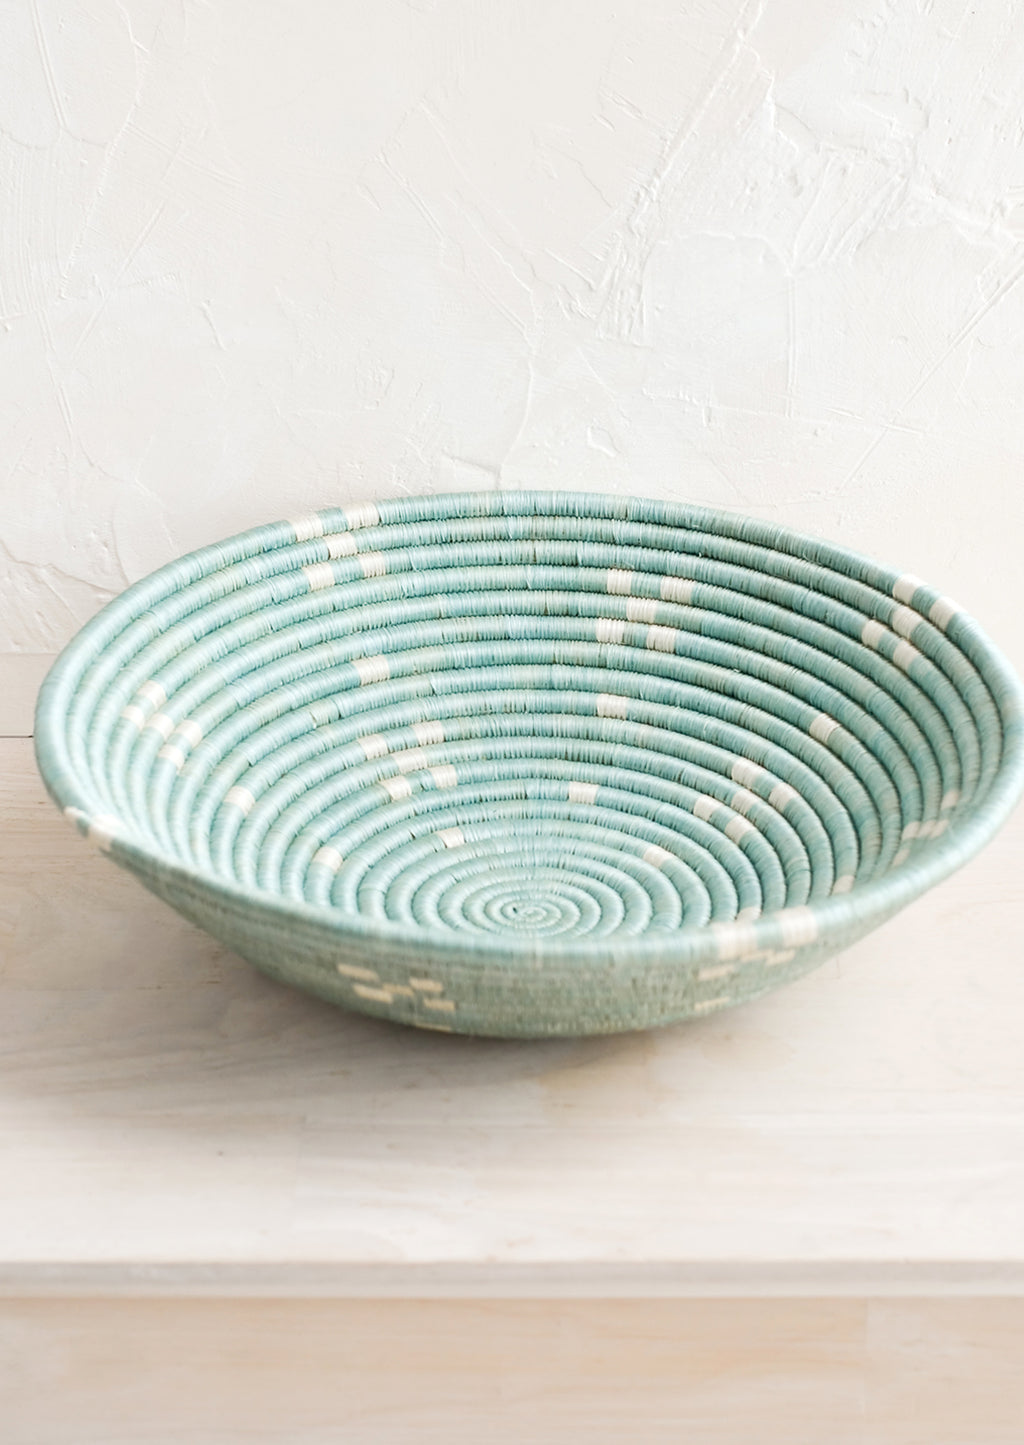 Lake Blue: A round sweetgrass bowl in blue with white pattern.